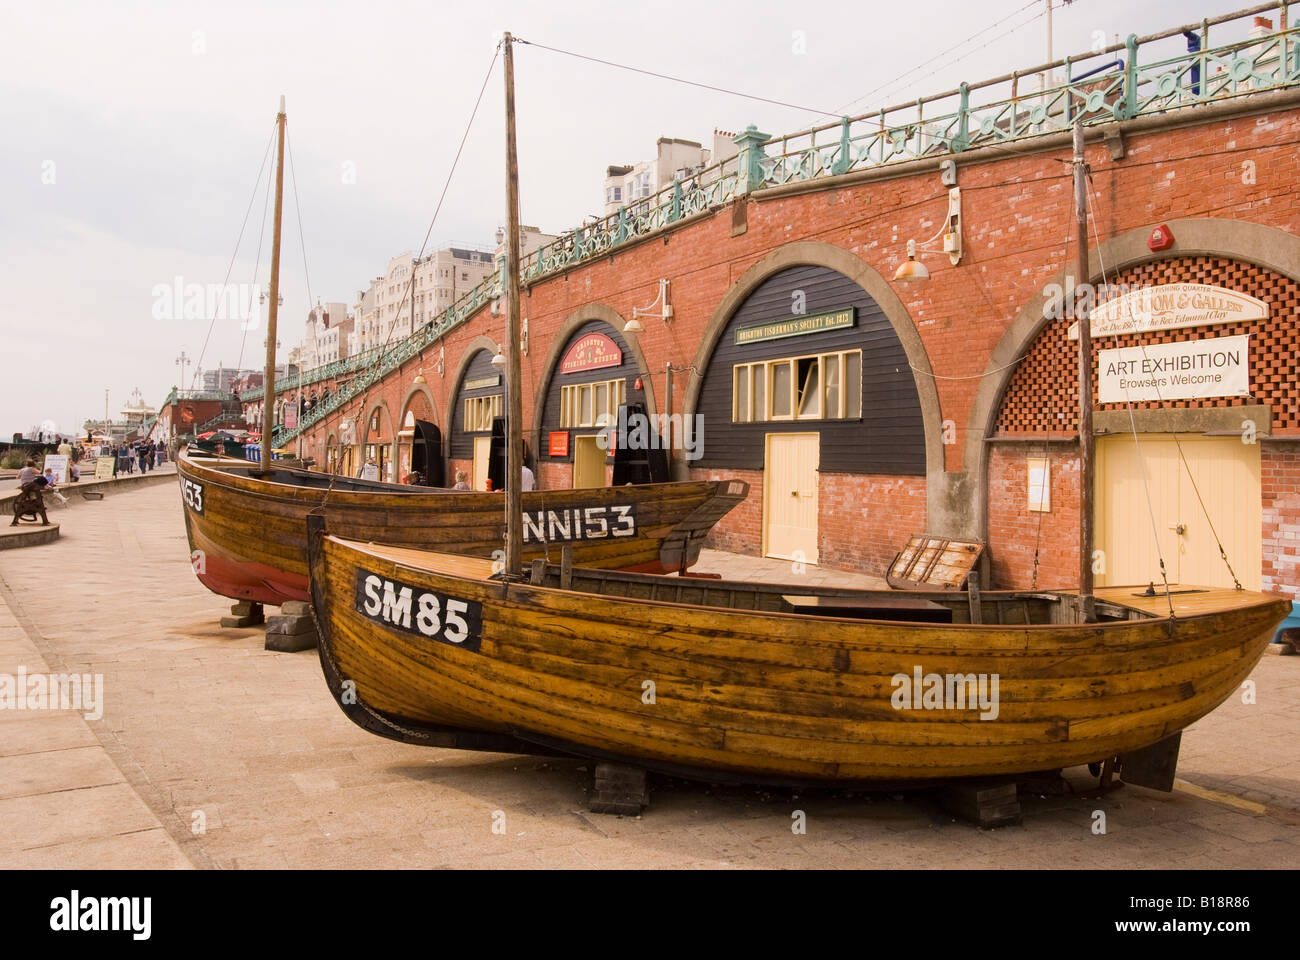 The Brighton fishing museum in the old fishing quarter, on the sea-front. Stock Photo